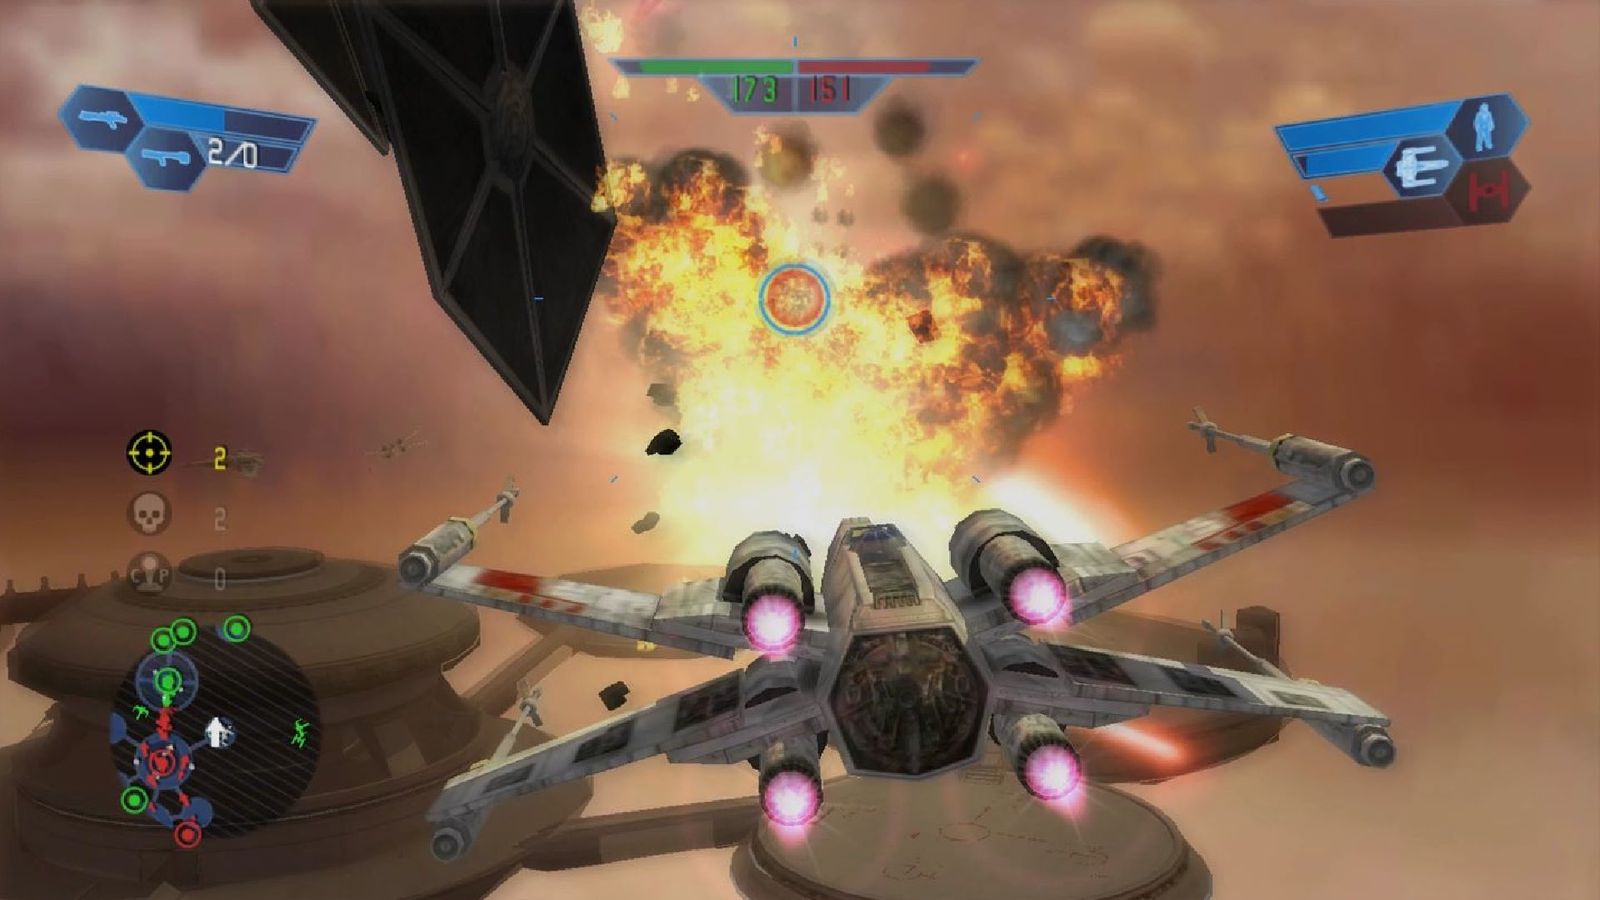 Star Wars battlefront X-wing shooting at an explosion 